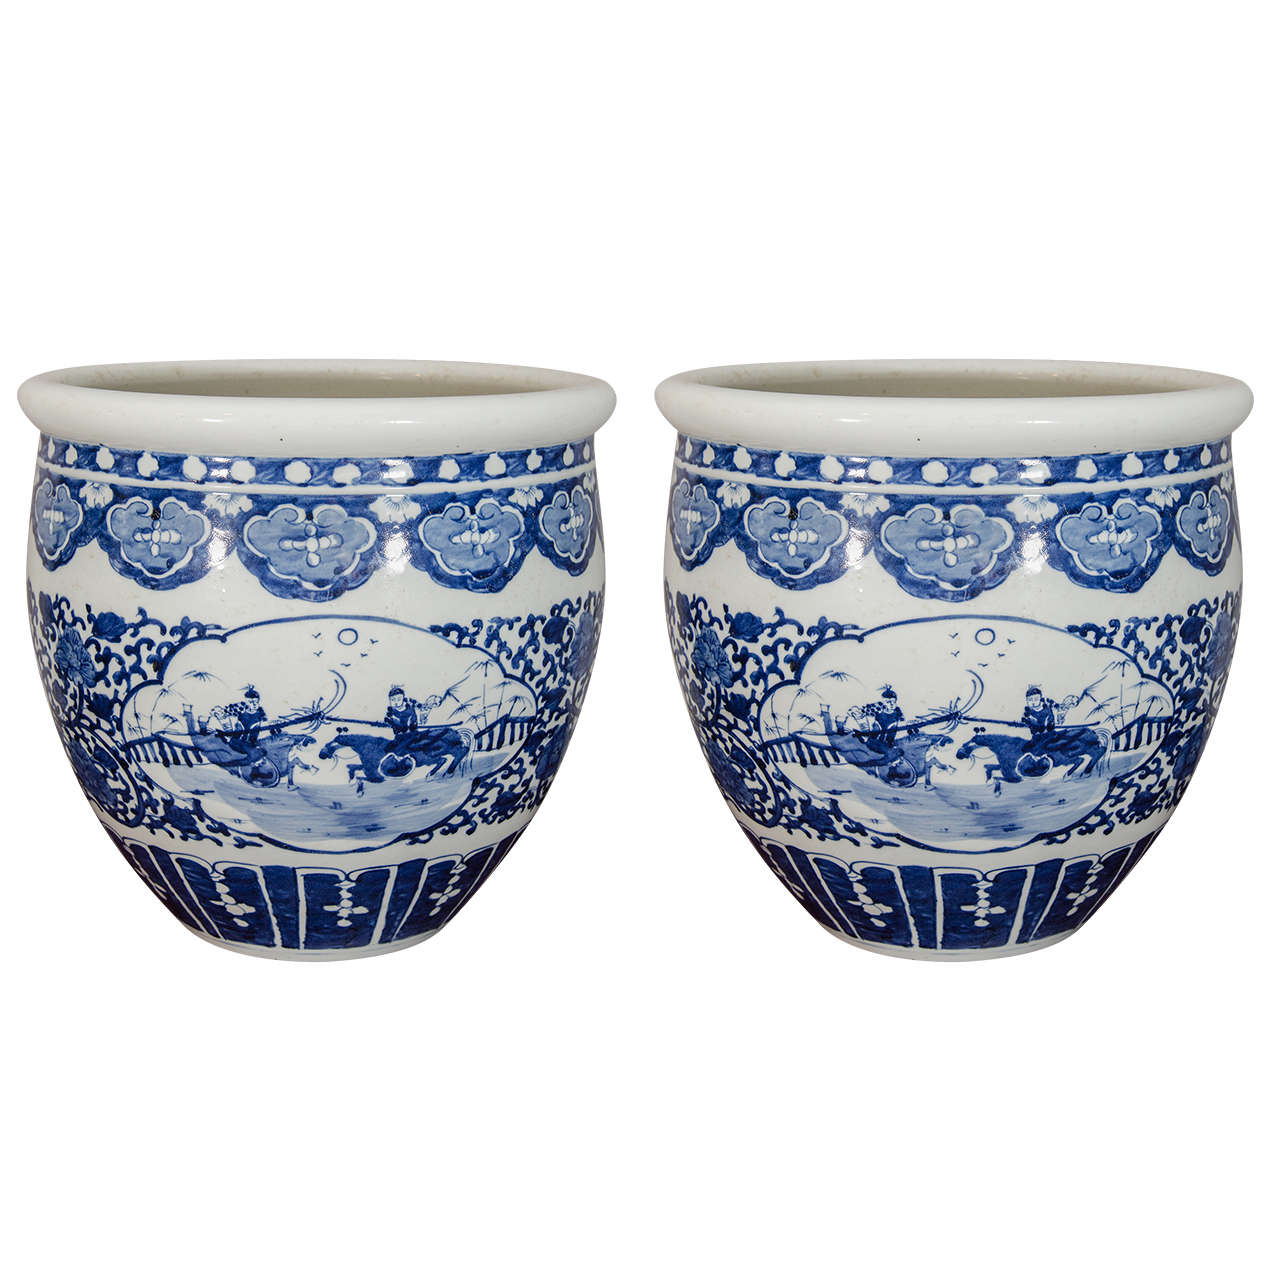 These Qing Guangxu-period fish bowl-style planters are decorated in cobalt blue with vignettes depicting sparring Chinese cavalry soldiers on horseback, surrounded by floral and geometric motifs.